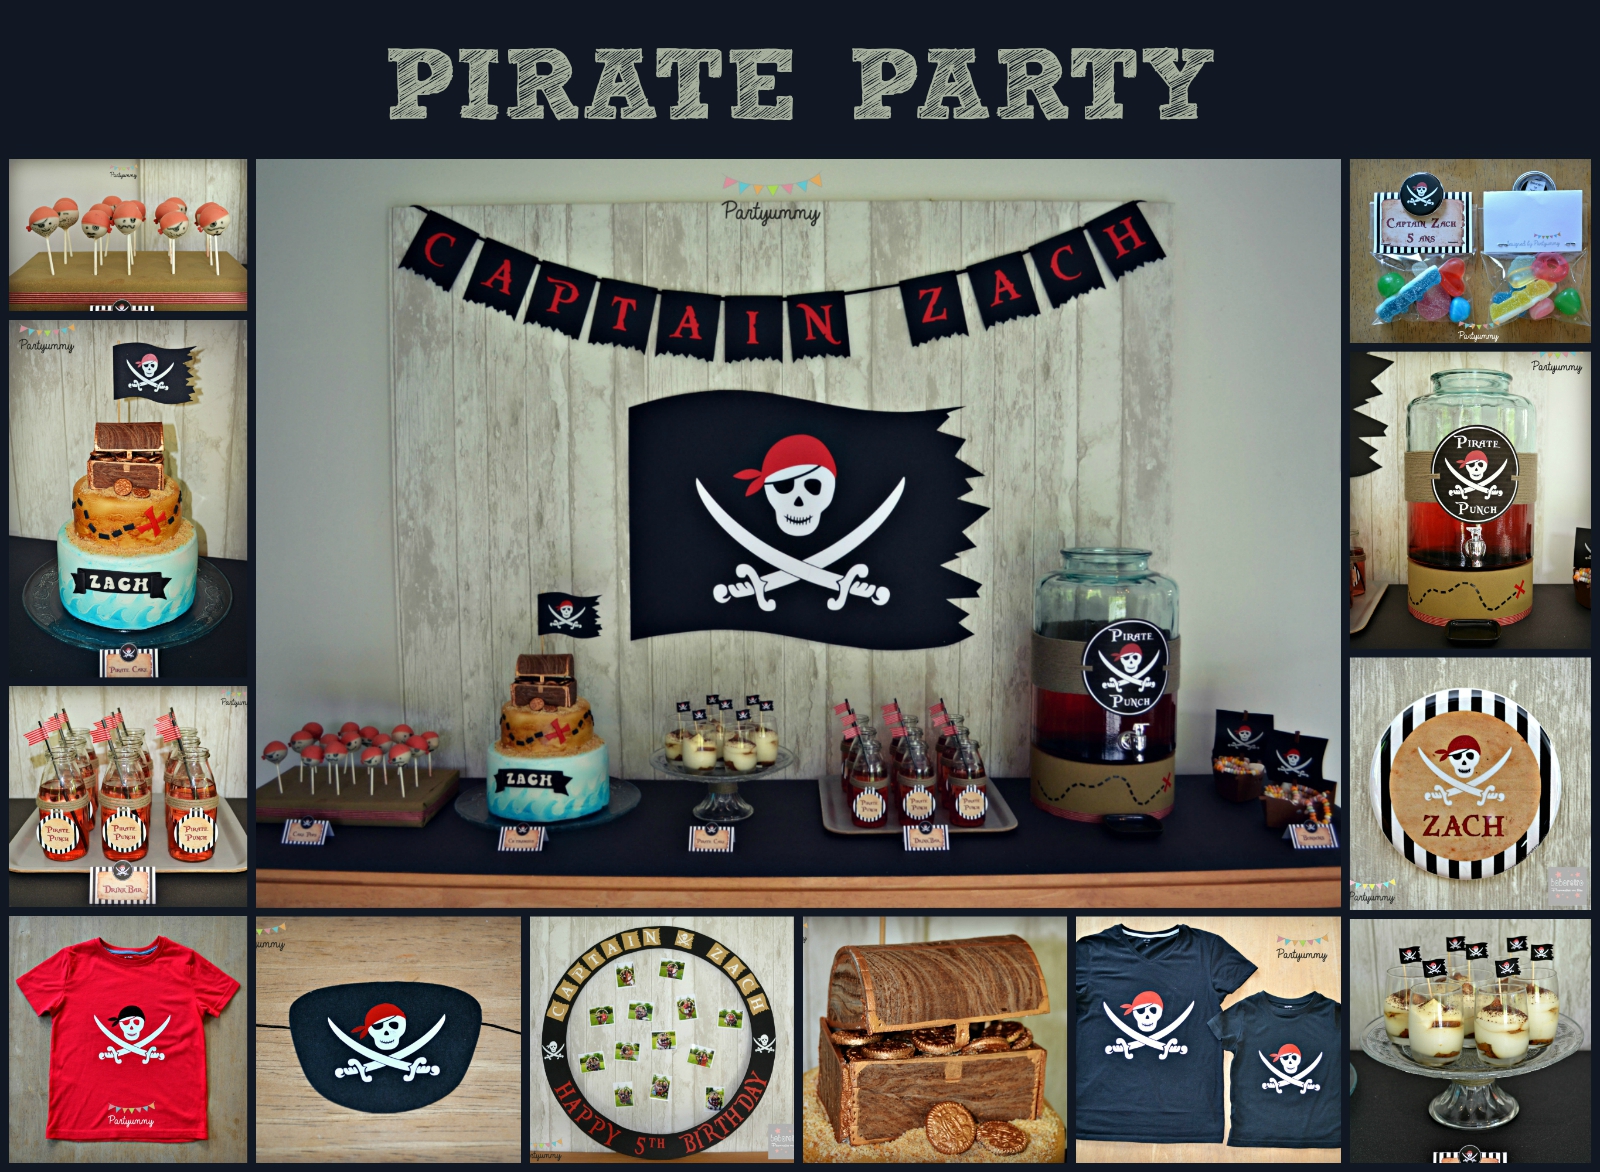 PirateParty2